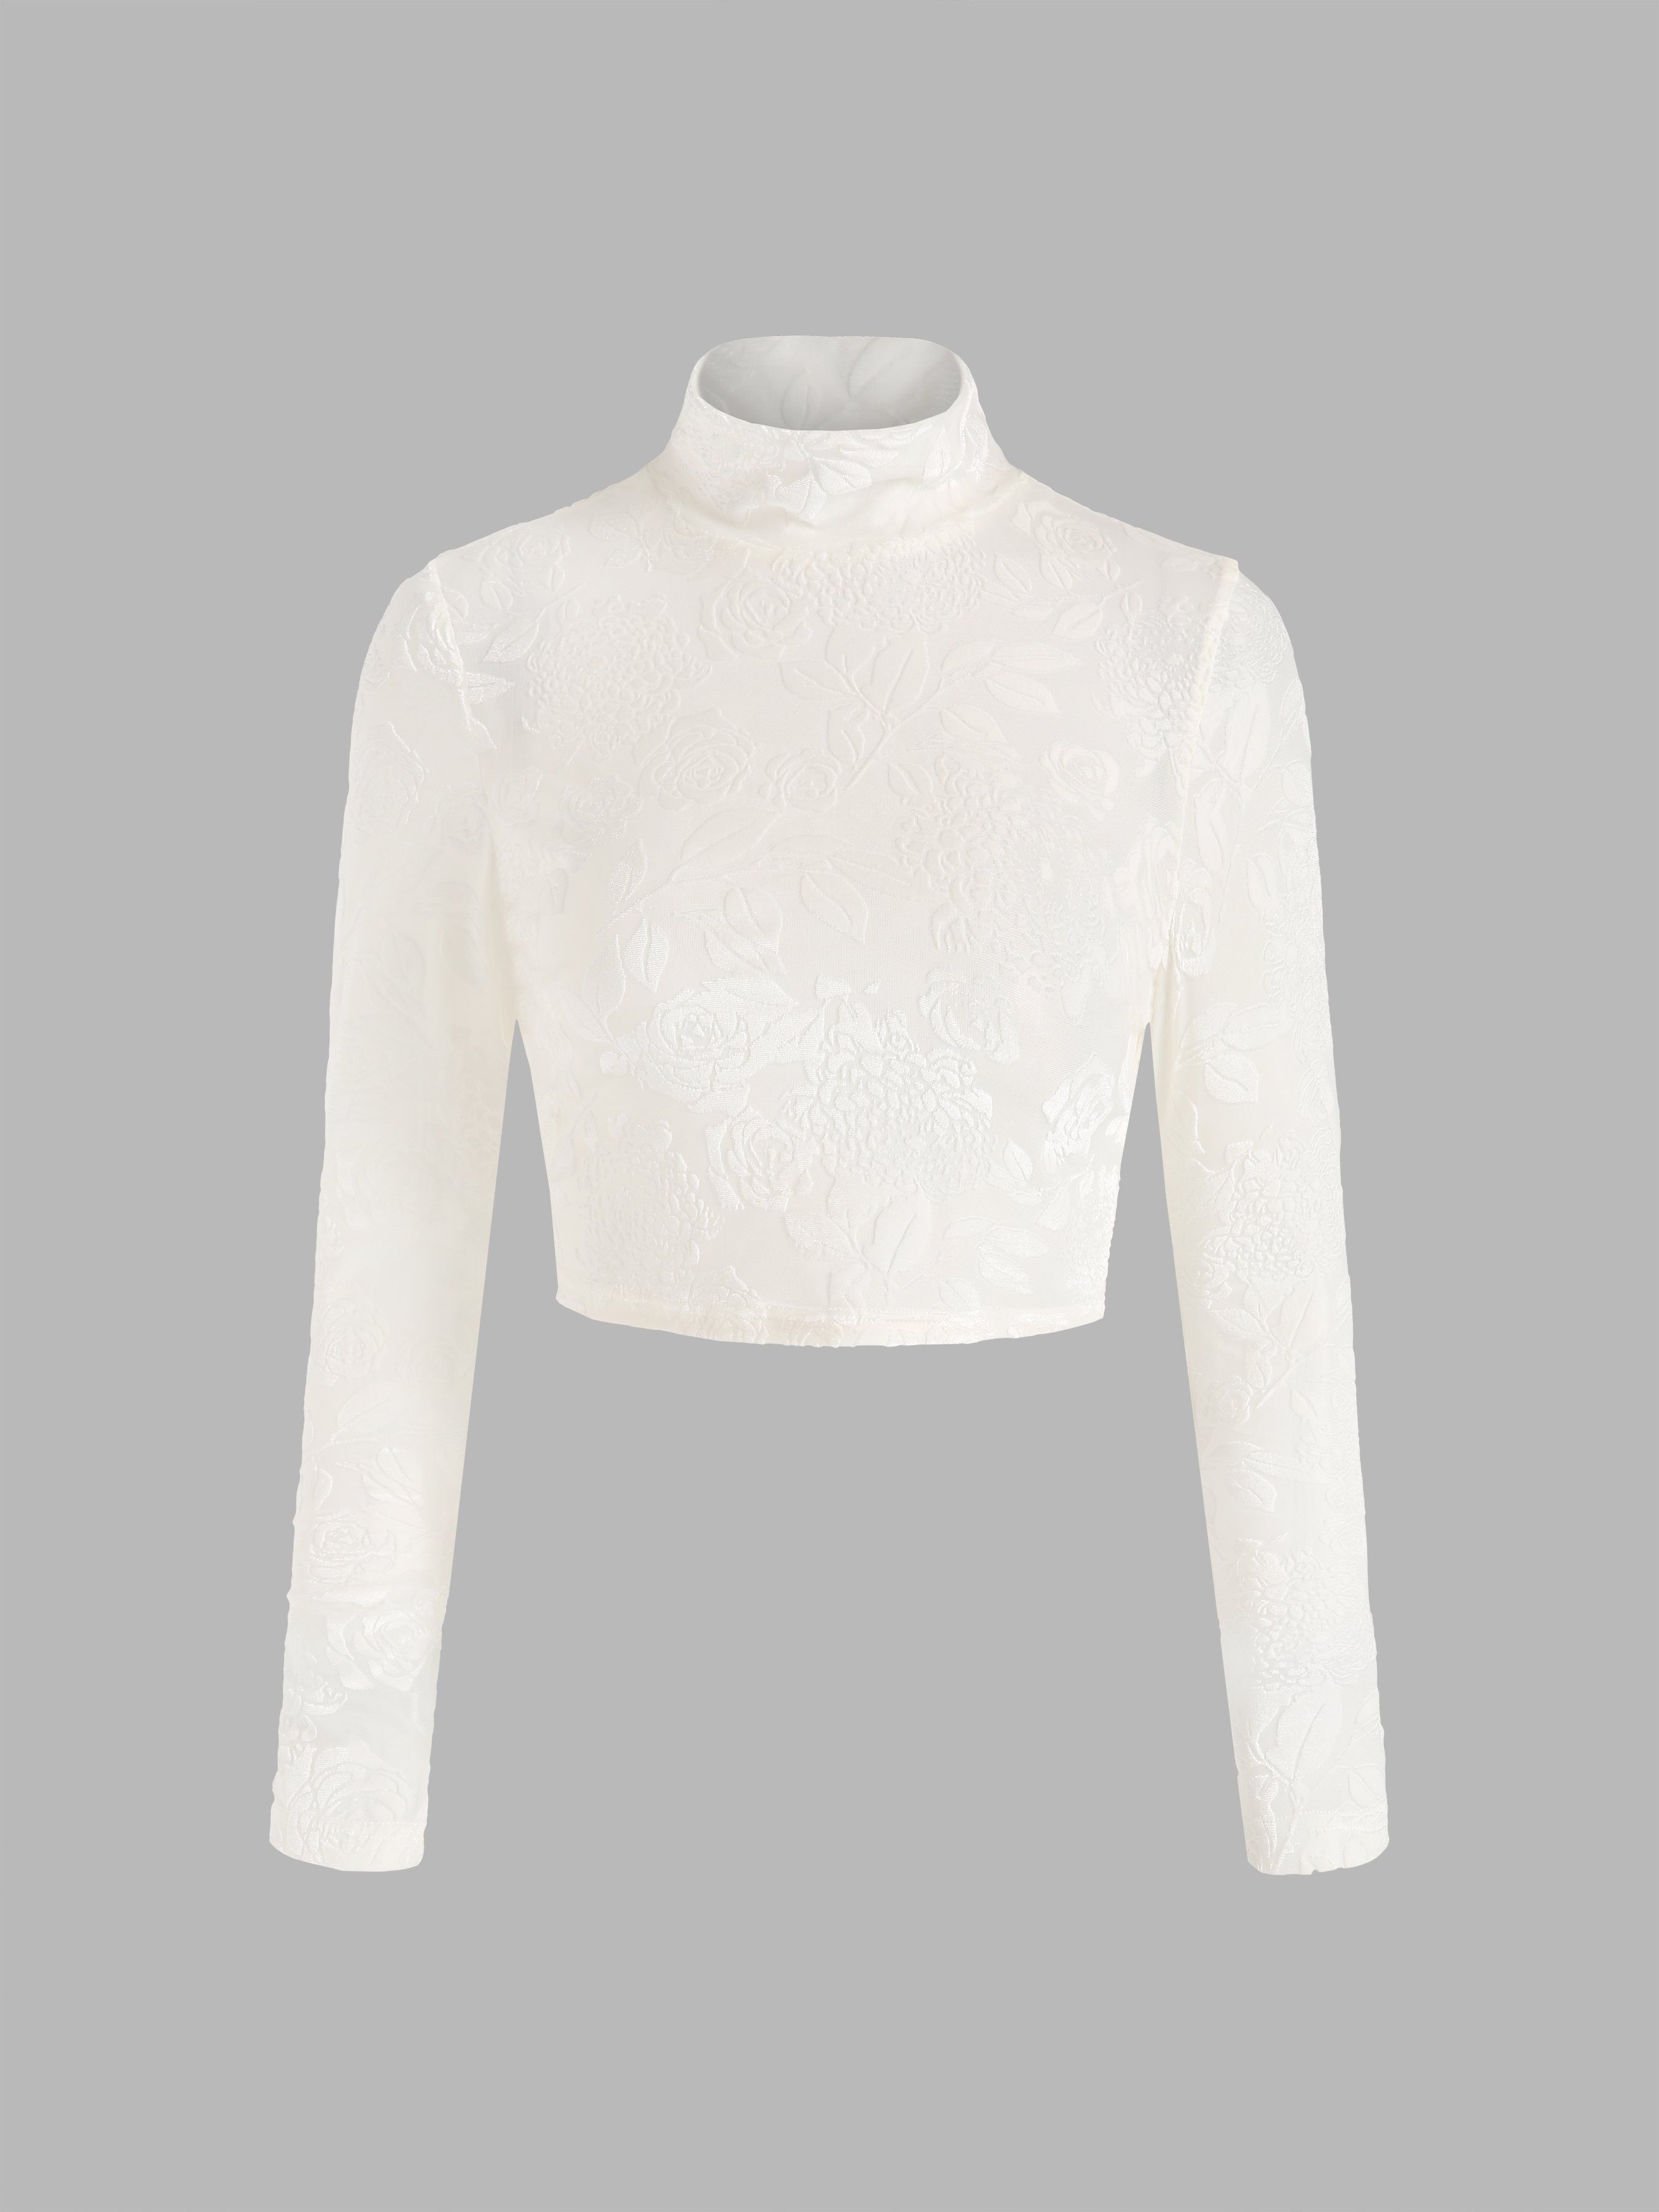 Love and Lace Sheer Turtleneck Top - Cider